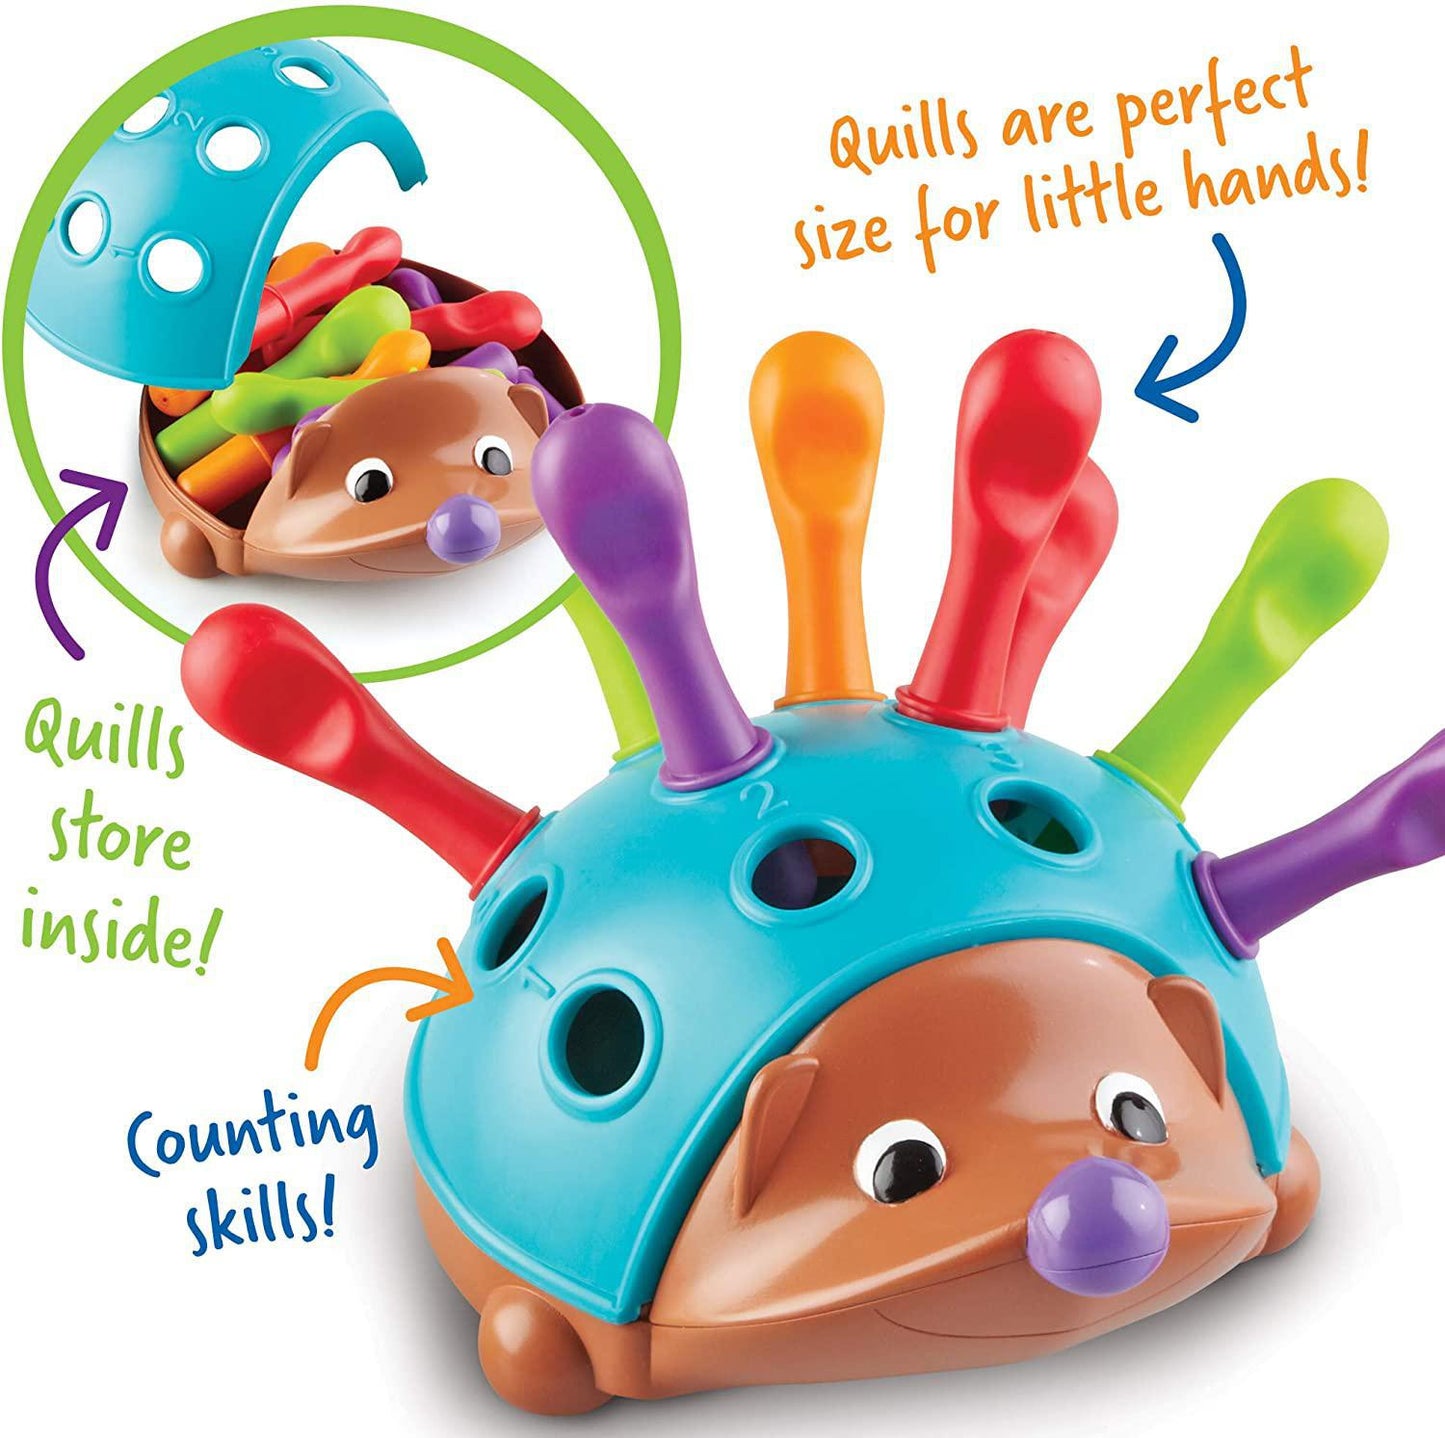 Spike The Fine Motor Hedgehog, Sensory, Fine Motor Toy, Toys for Toddlers, Ages 18 months+